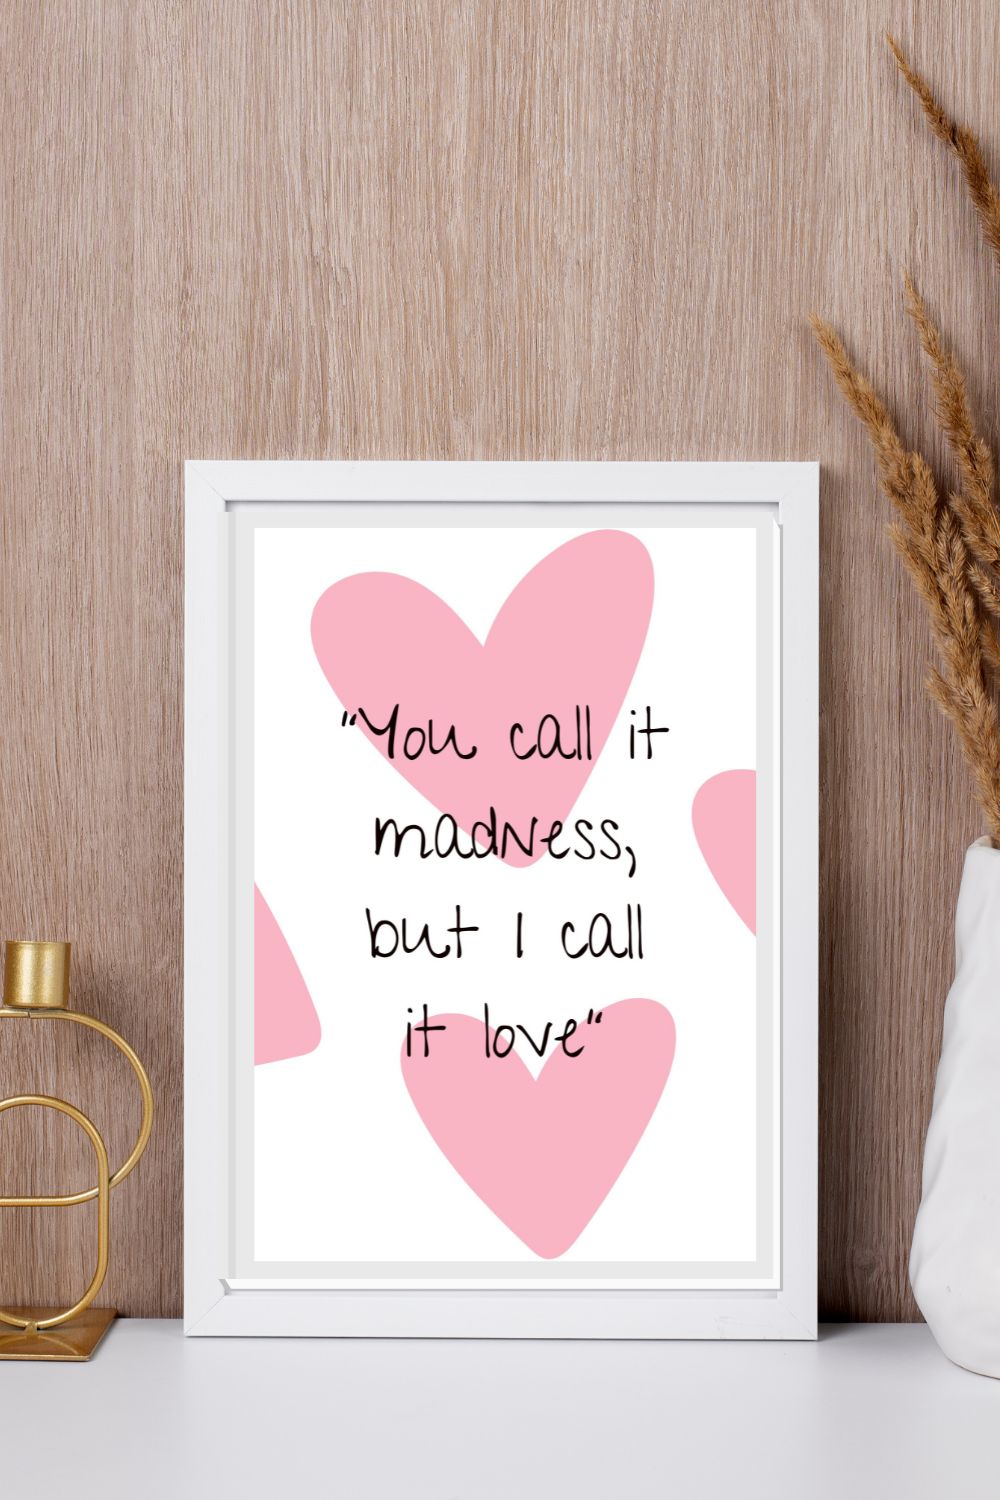 You call it madness, but I call it love - Love Print | Valentine\\\'s Day Decor | Valentine Printable Wall Art | Heart Wall Decor - Digital pinterest preview image.